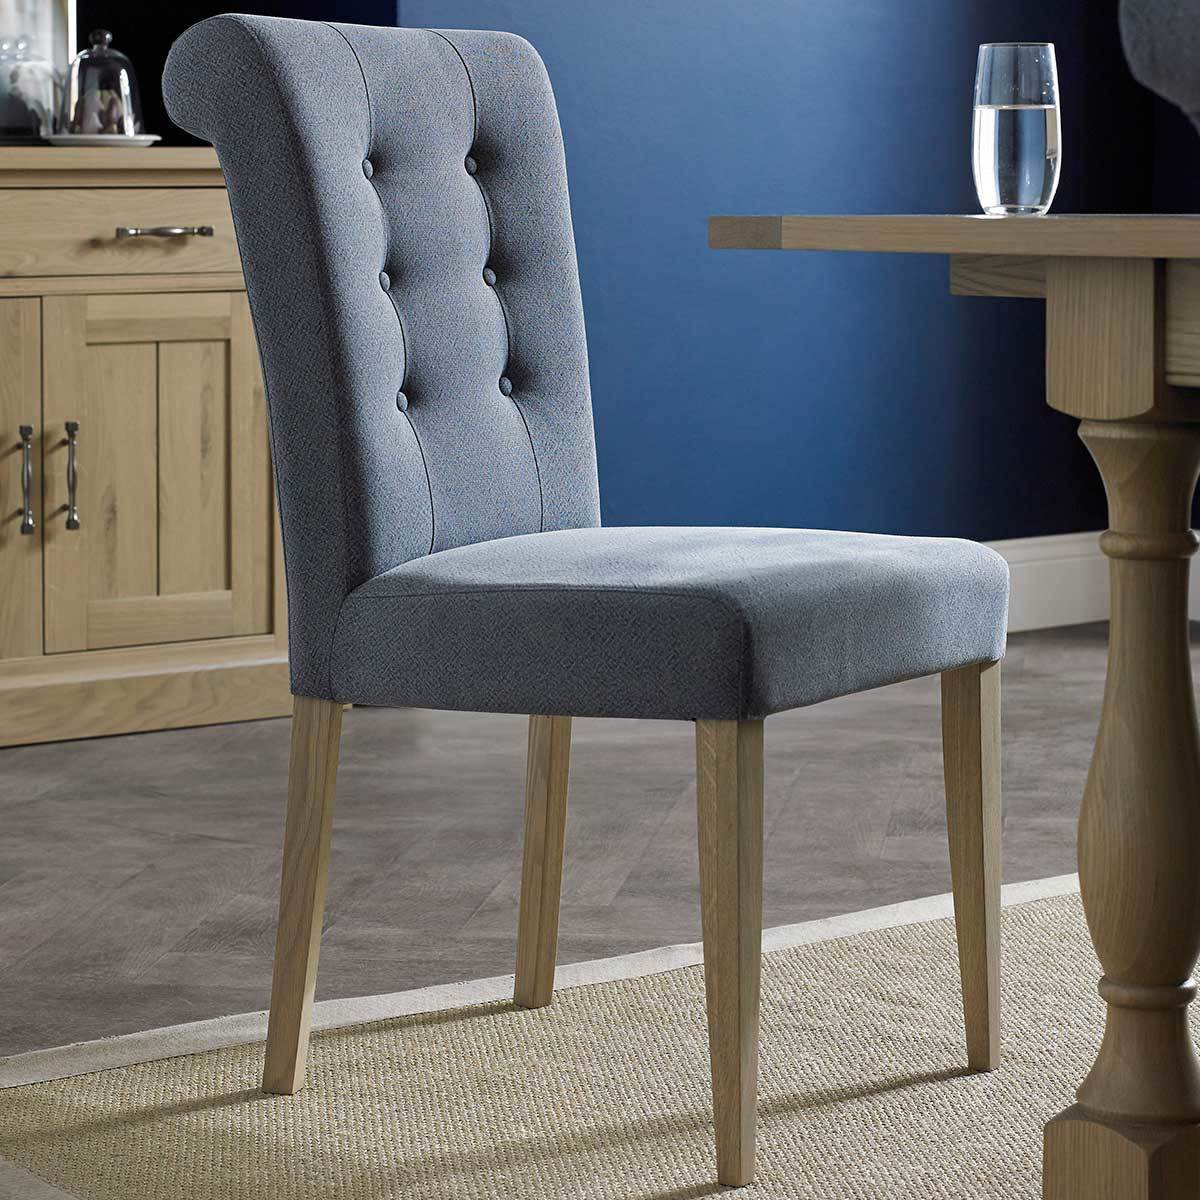 Bentley Designs Chartreuse Slate Blue Fabric Upholstered Dining